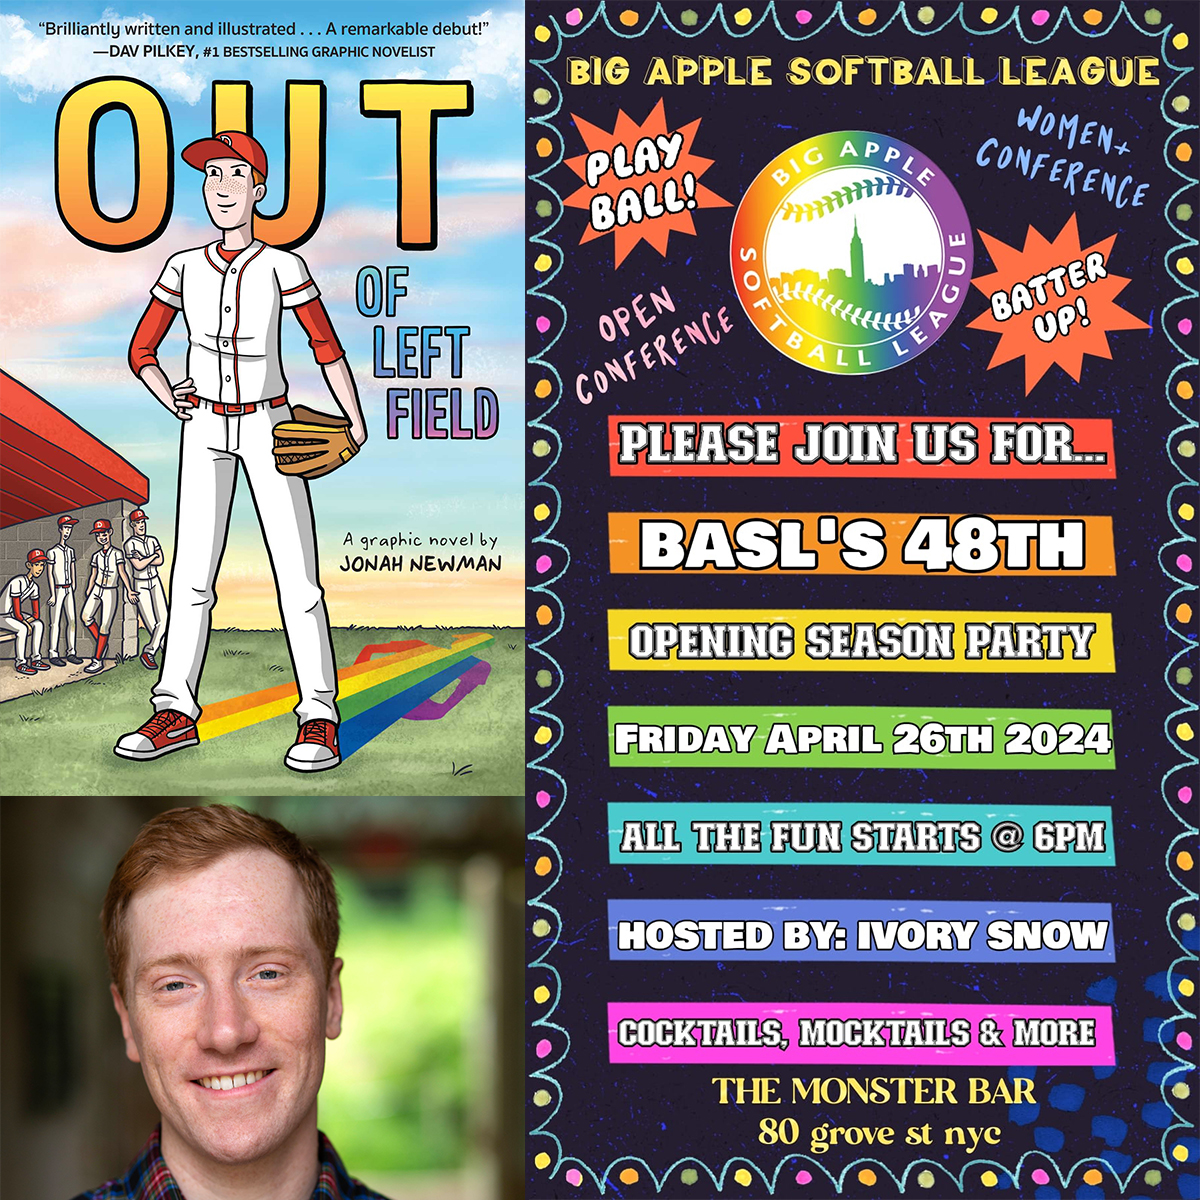 This Friday: my beloved Big Apple Softball League's Opening Season Party at The Monster, hosted by Ms. Ivory Snow! I'll be there selling and signing copies of OUT OF LEFT FIELD. It'll be a gay old time!